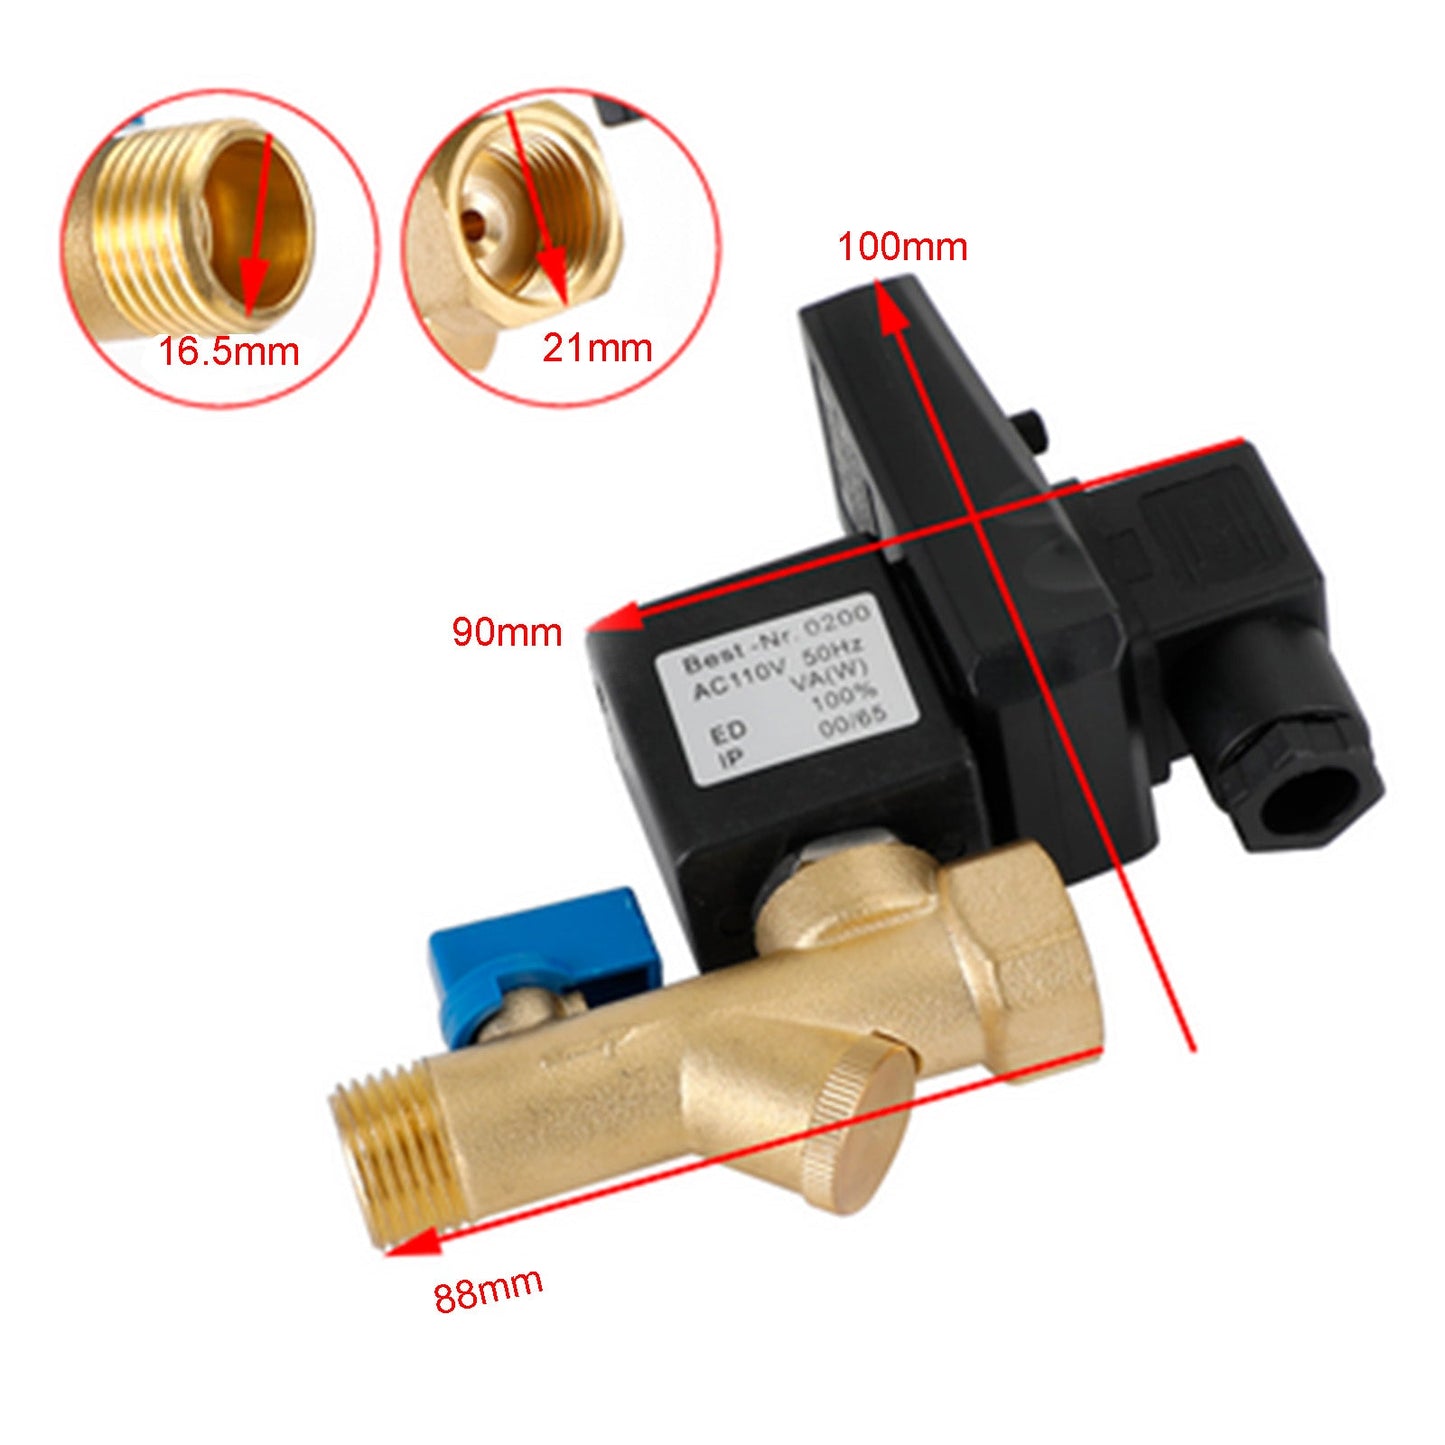 AC110V 1/2" Automatic Electronic Timed Air Compressor Auto Drain Valve